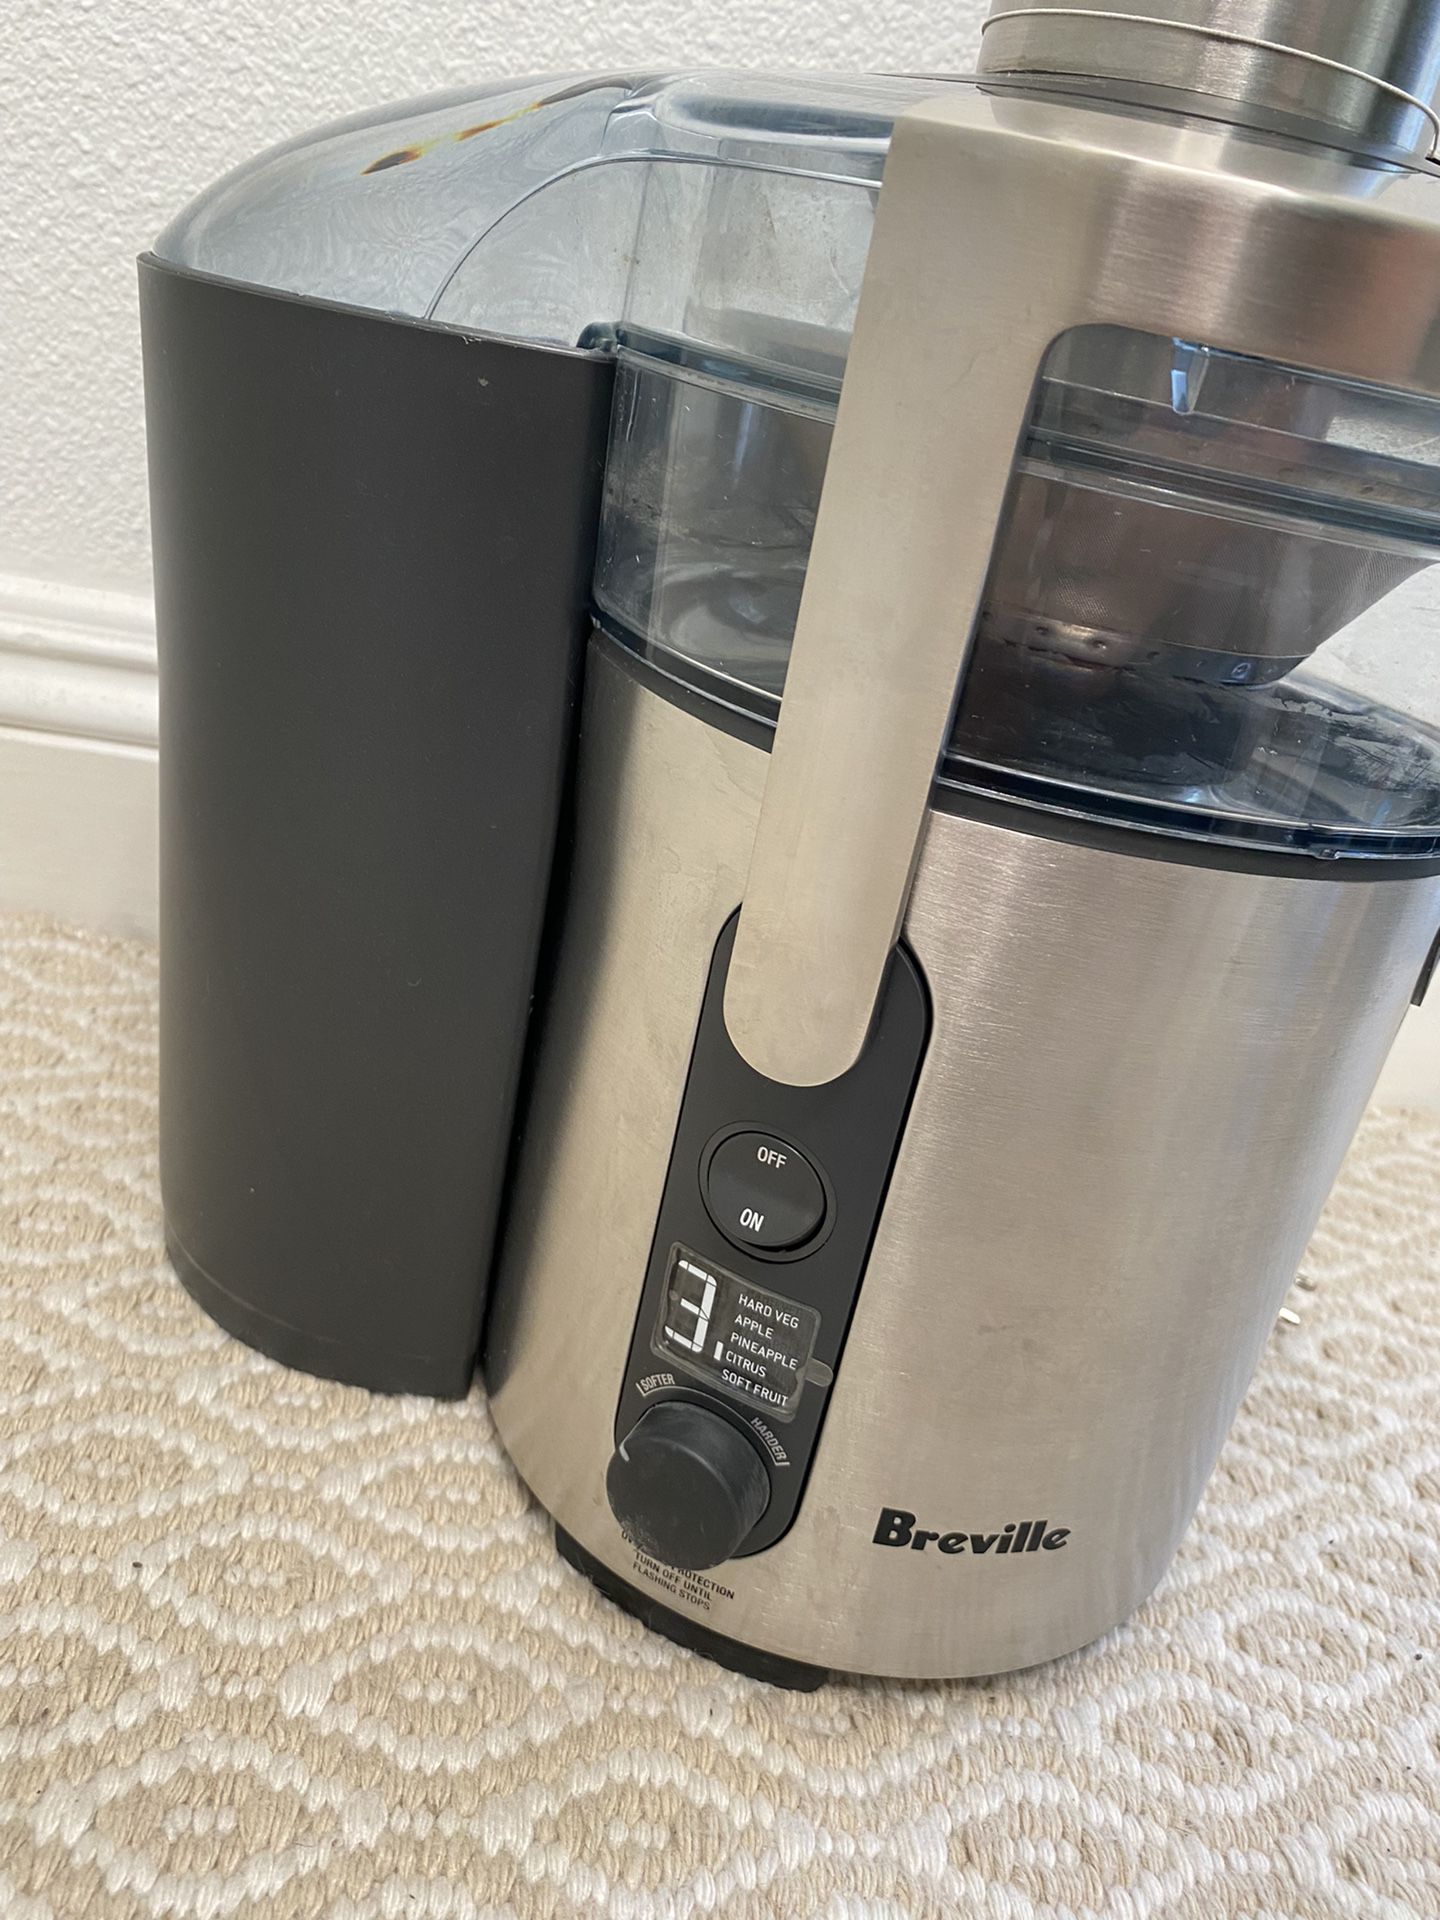 Breville The Juice Fountain Multi-Speed BJE510XL 5 Speed Stainless Steal Juicer